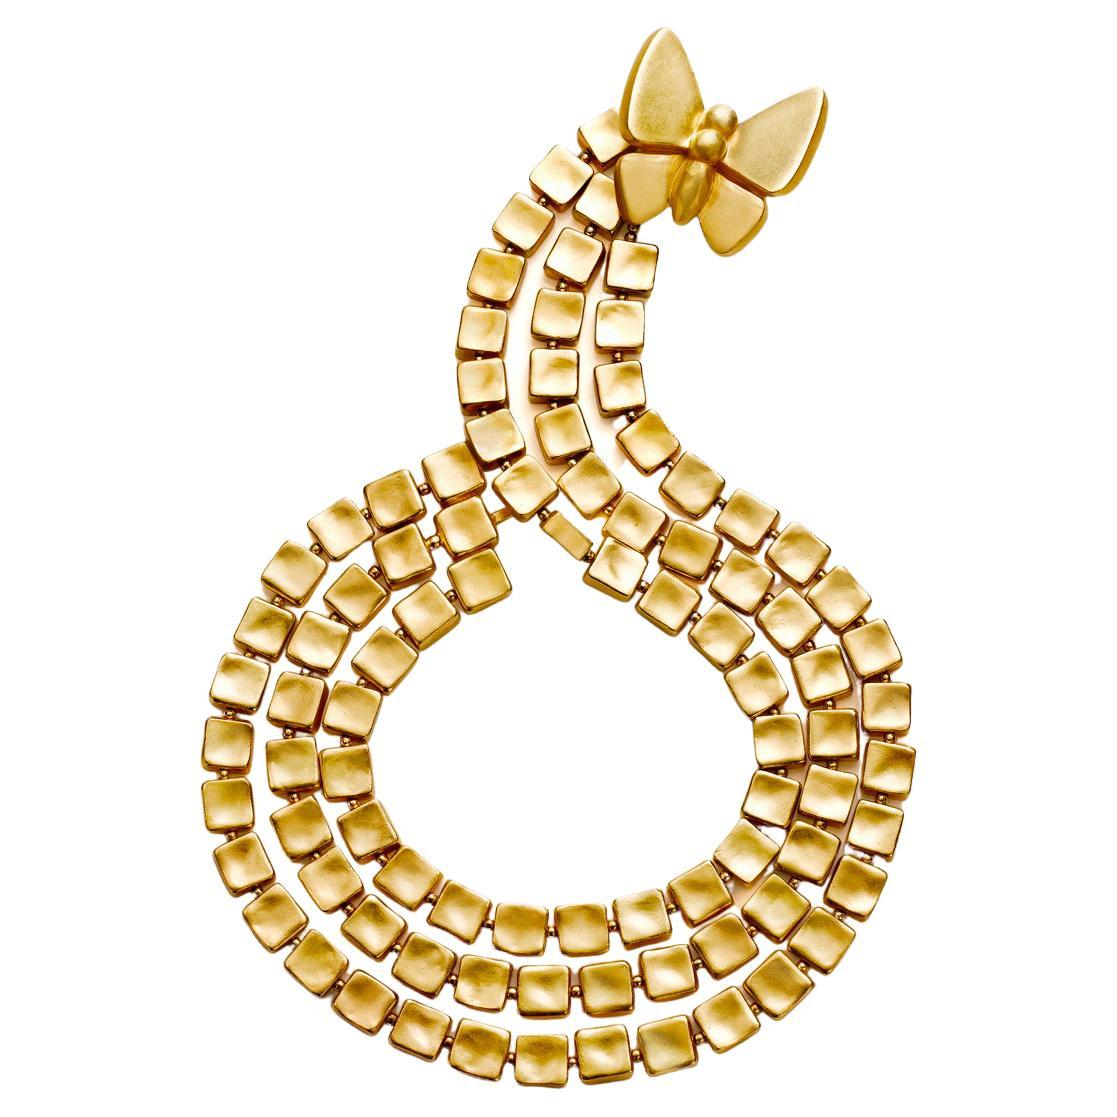 Vintage Lanvin Gold Tone Necklace with Butterfly Clasp Necklace Circa 1980s For Sale 1